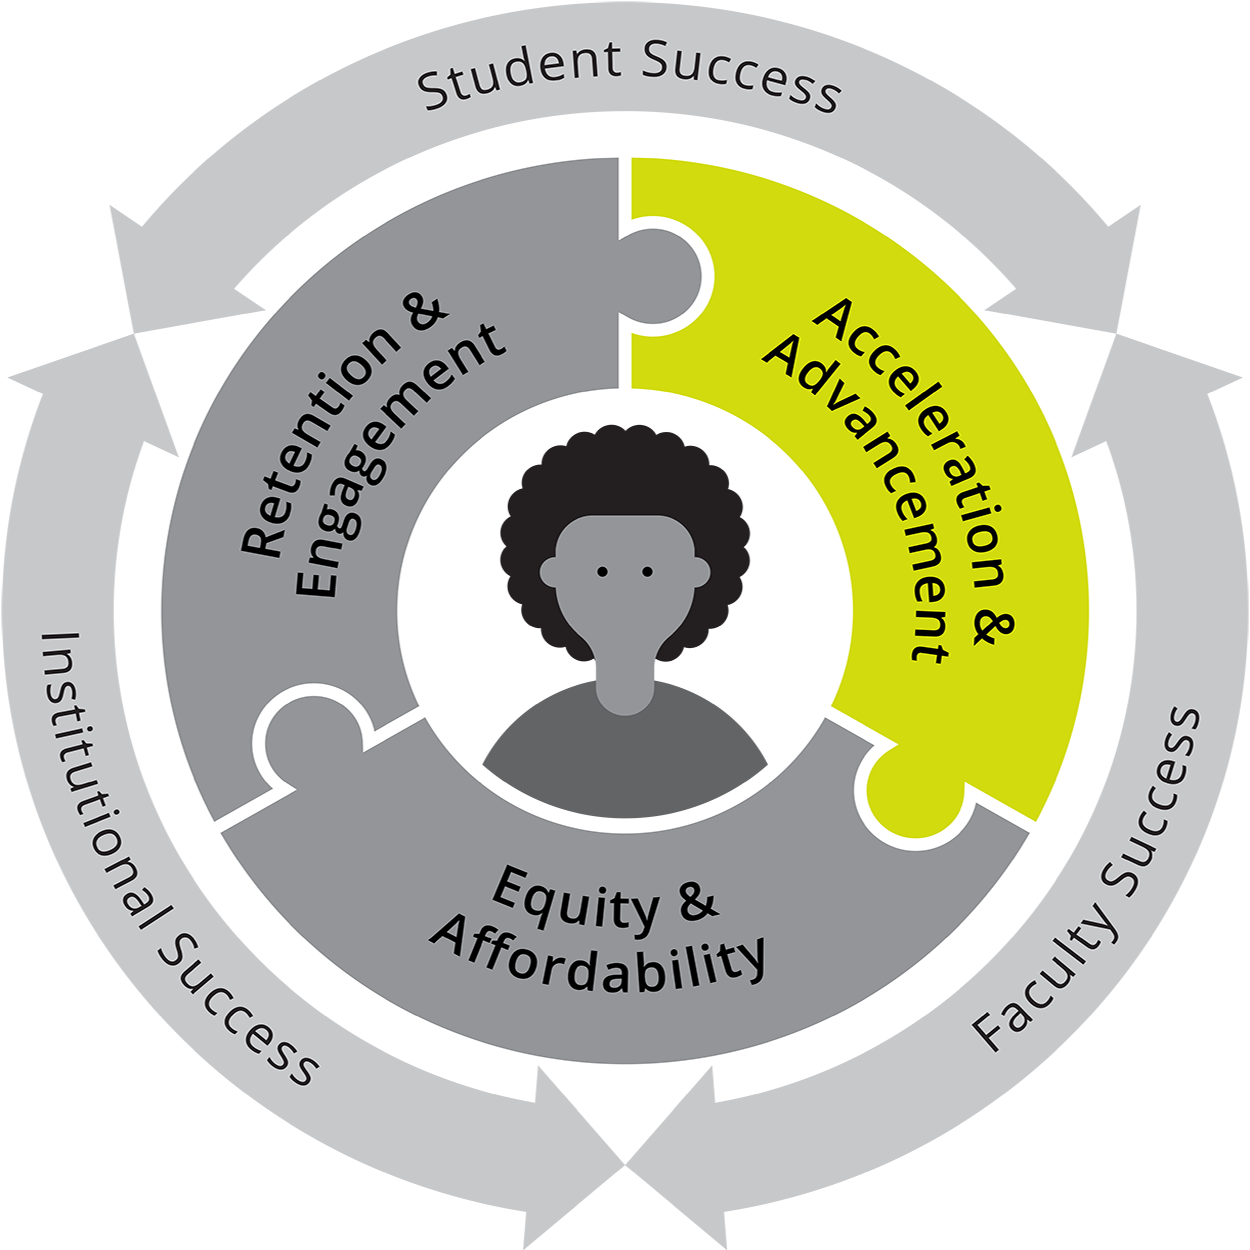 Gray circle graphic with "Student, Institutional, and Faculty Success" written on the outer ring. The middle ring is three connecting puzzle pieces that read: Retention & Engagnement, Acceleration & Advancement, and Equity & Affordability. In the center is an image of a student. Acceleration & Advancement piece stands out in green.